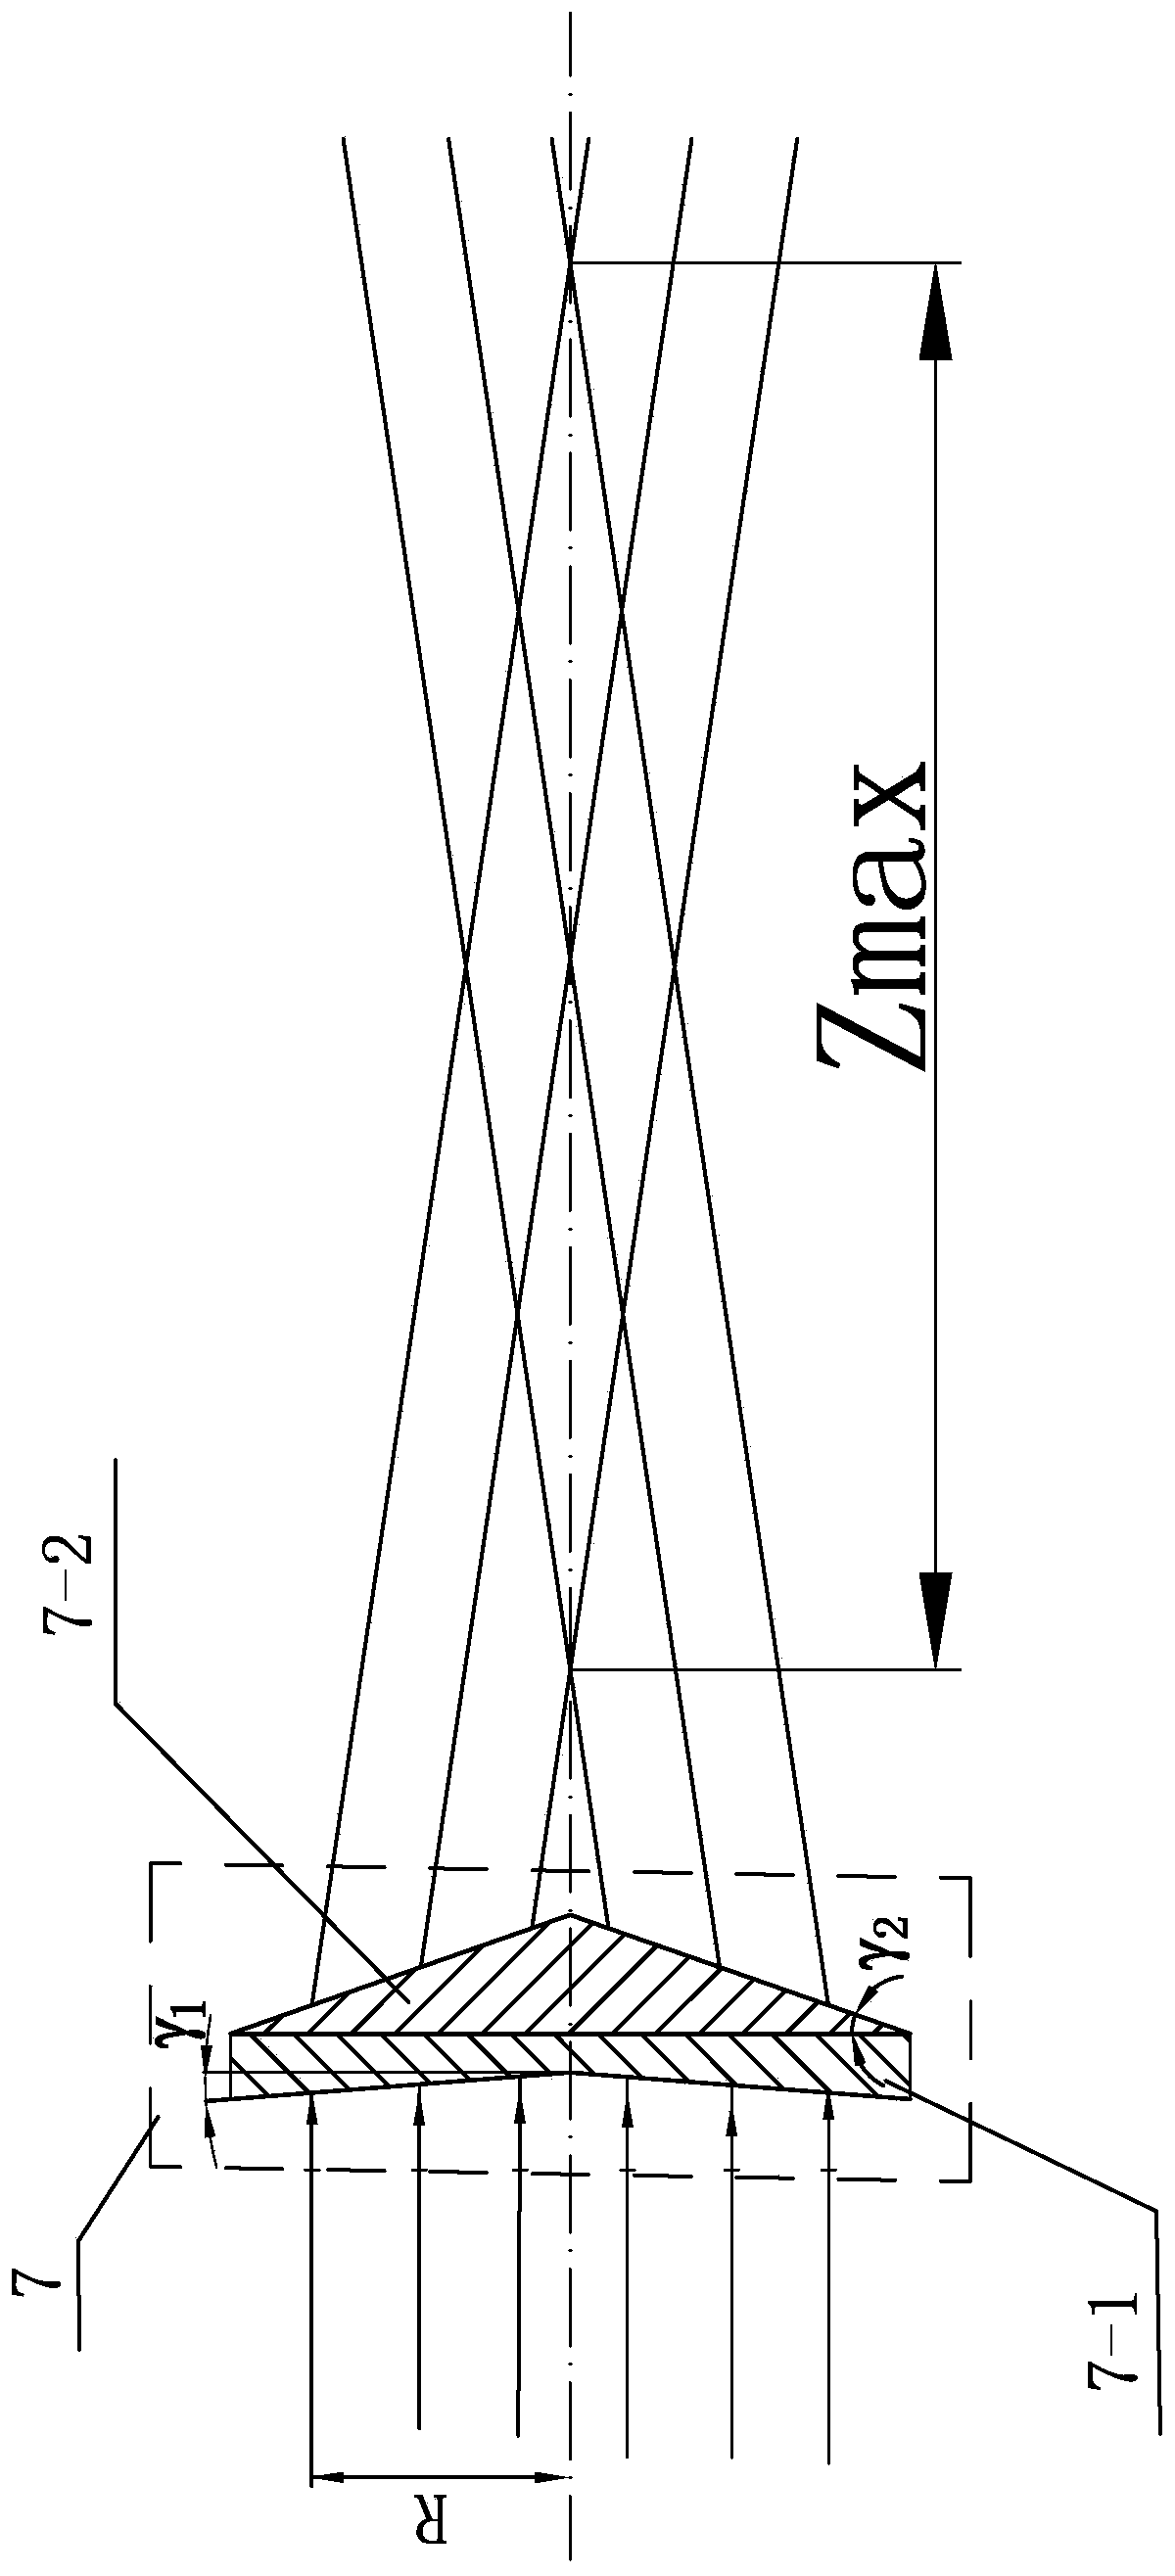 Laser beam focusing method and system for coupled water beam optical fiber